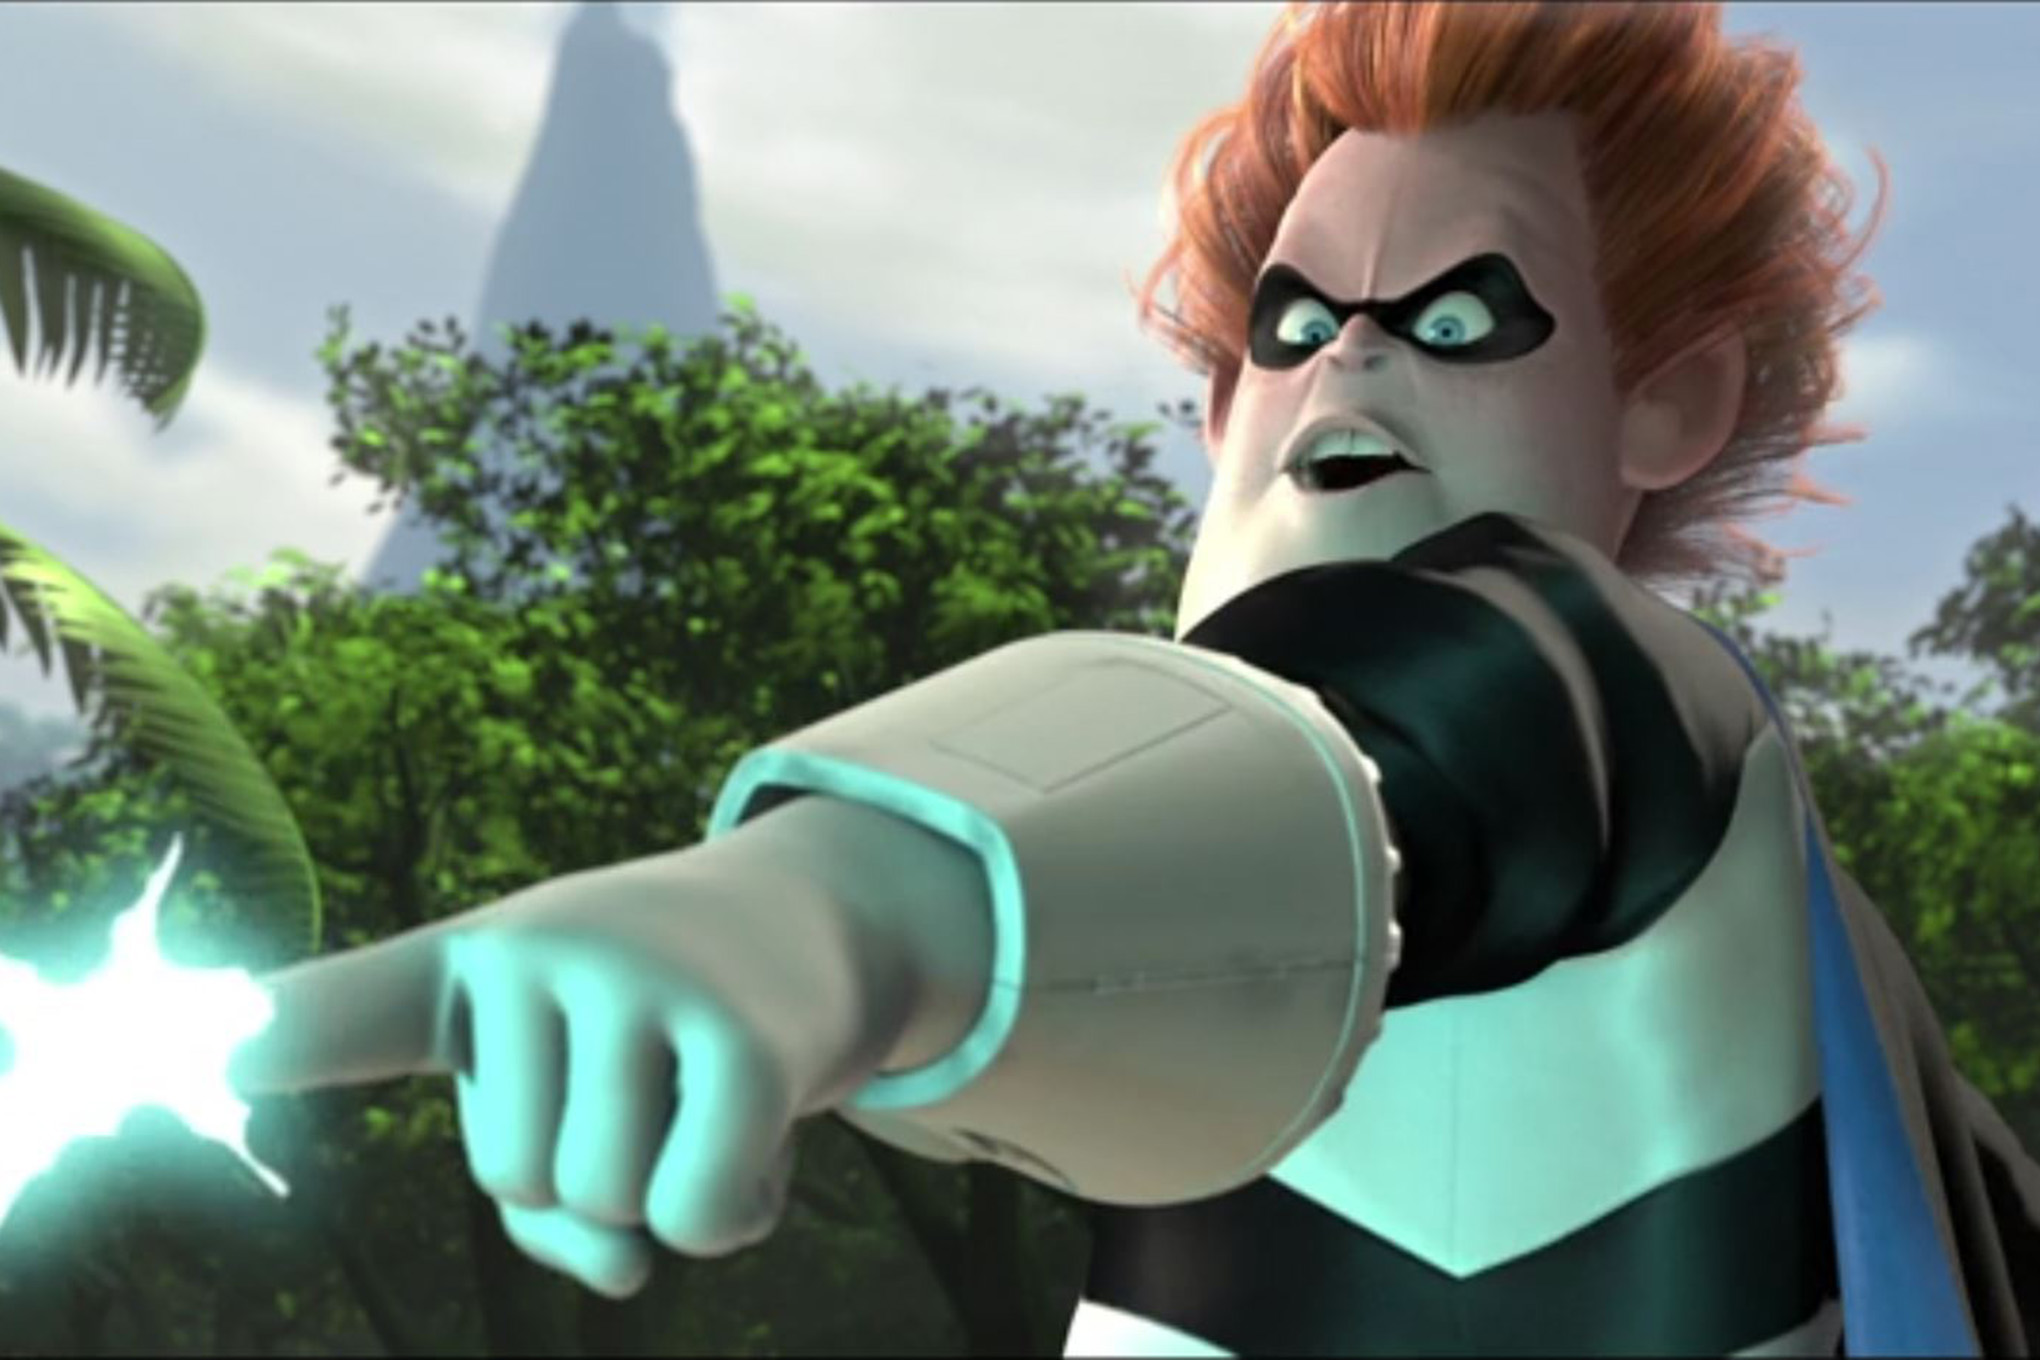 Syndrome shoots a bolt of energy in The Incredibles.